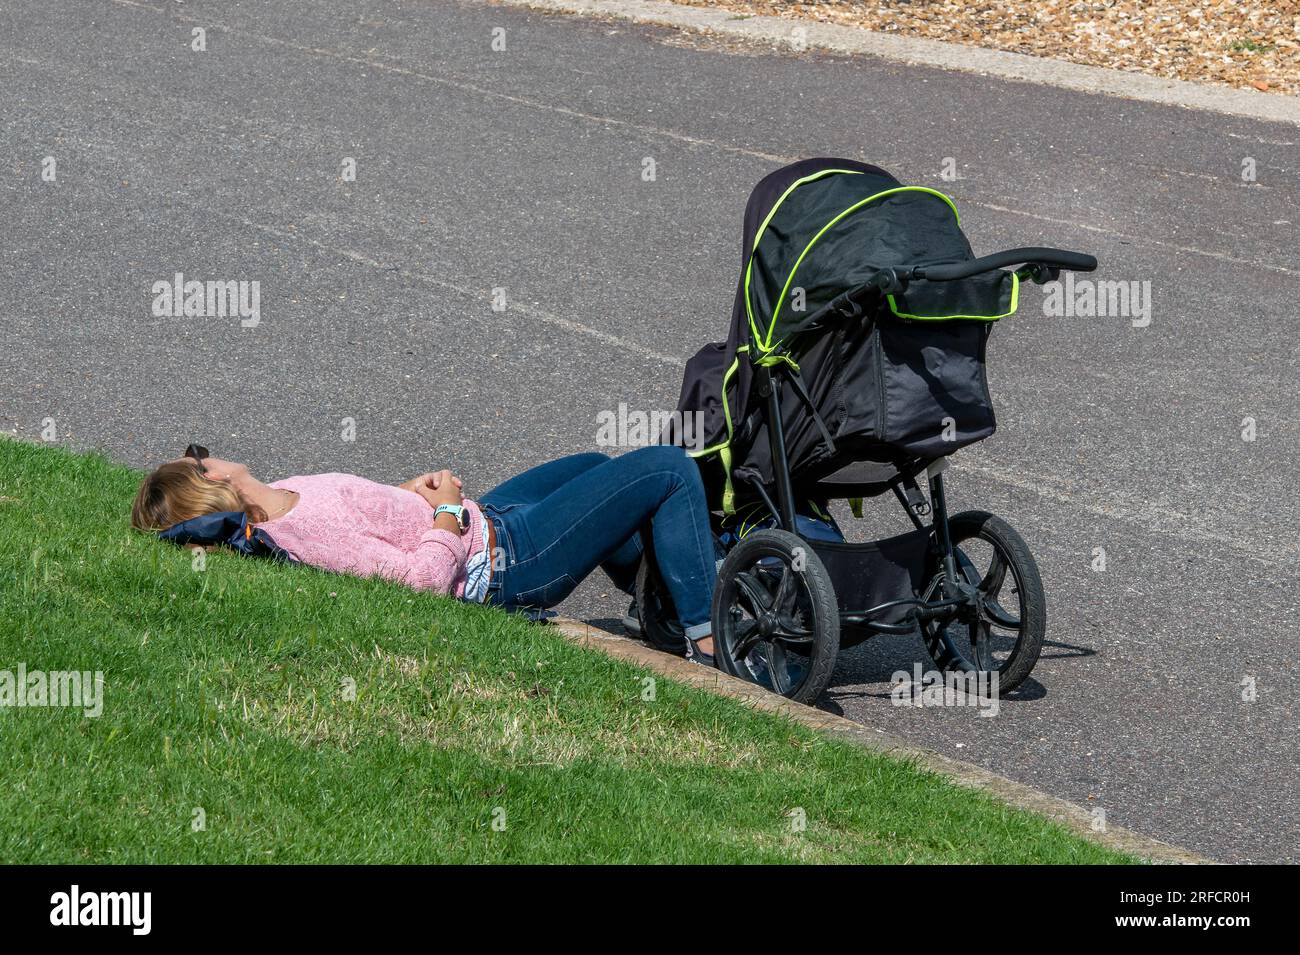 young mother with pushchair taking a rest. young mum sleeping next to pushchair on a warm summers day. mum taking a break from childcare having a nap. Stock Photo